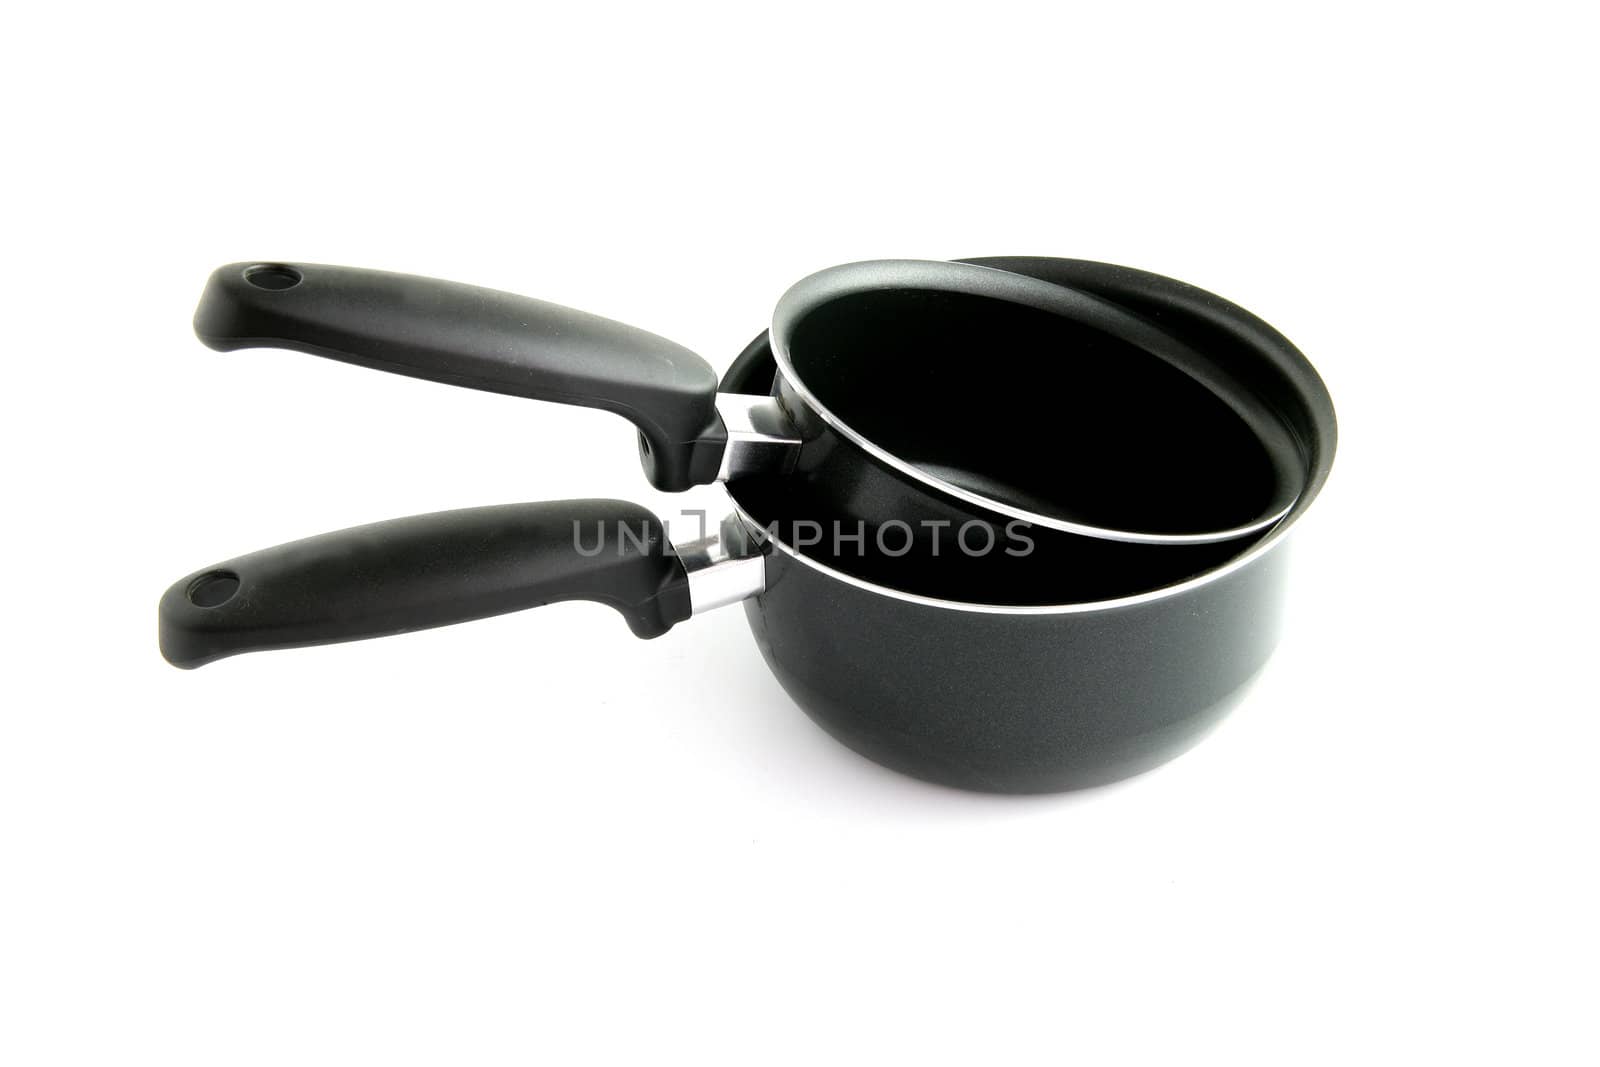 Two different sized saucepans by phovoir